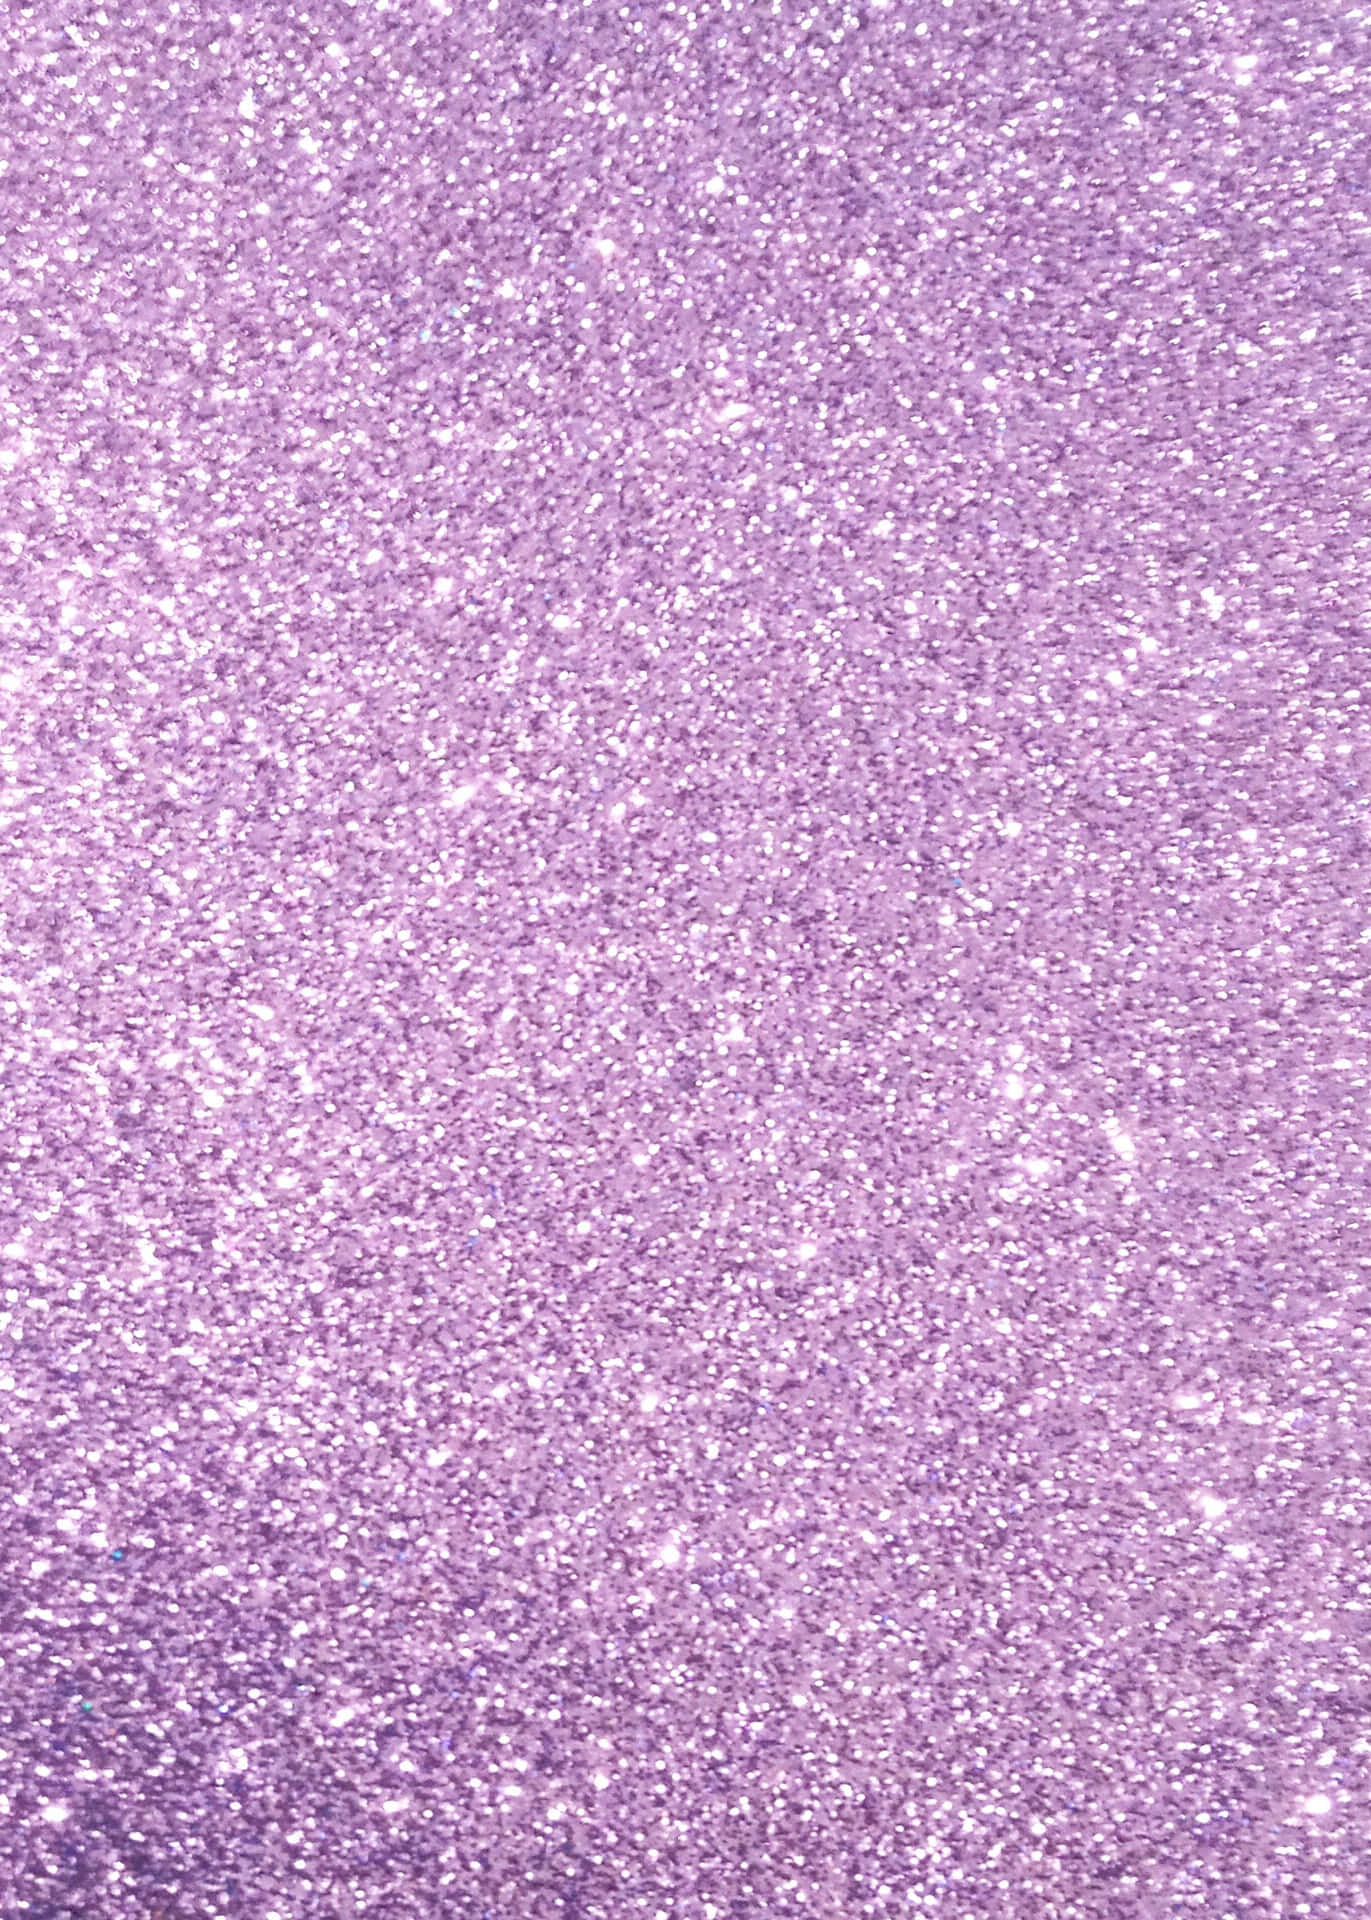 purple sparkly backgrounds